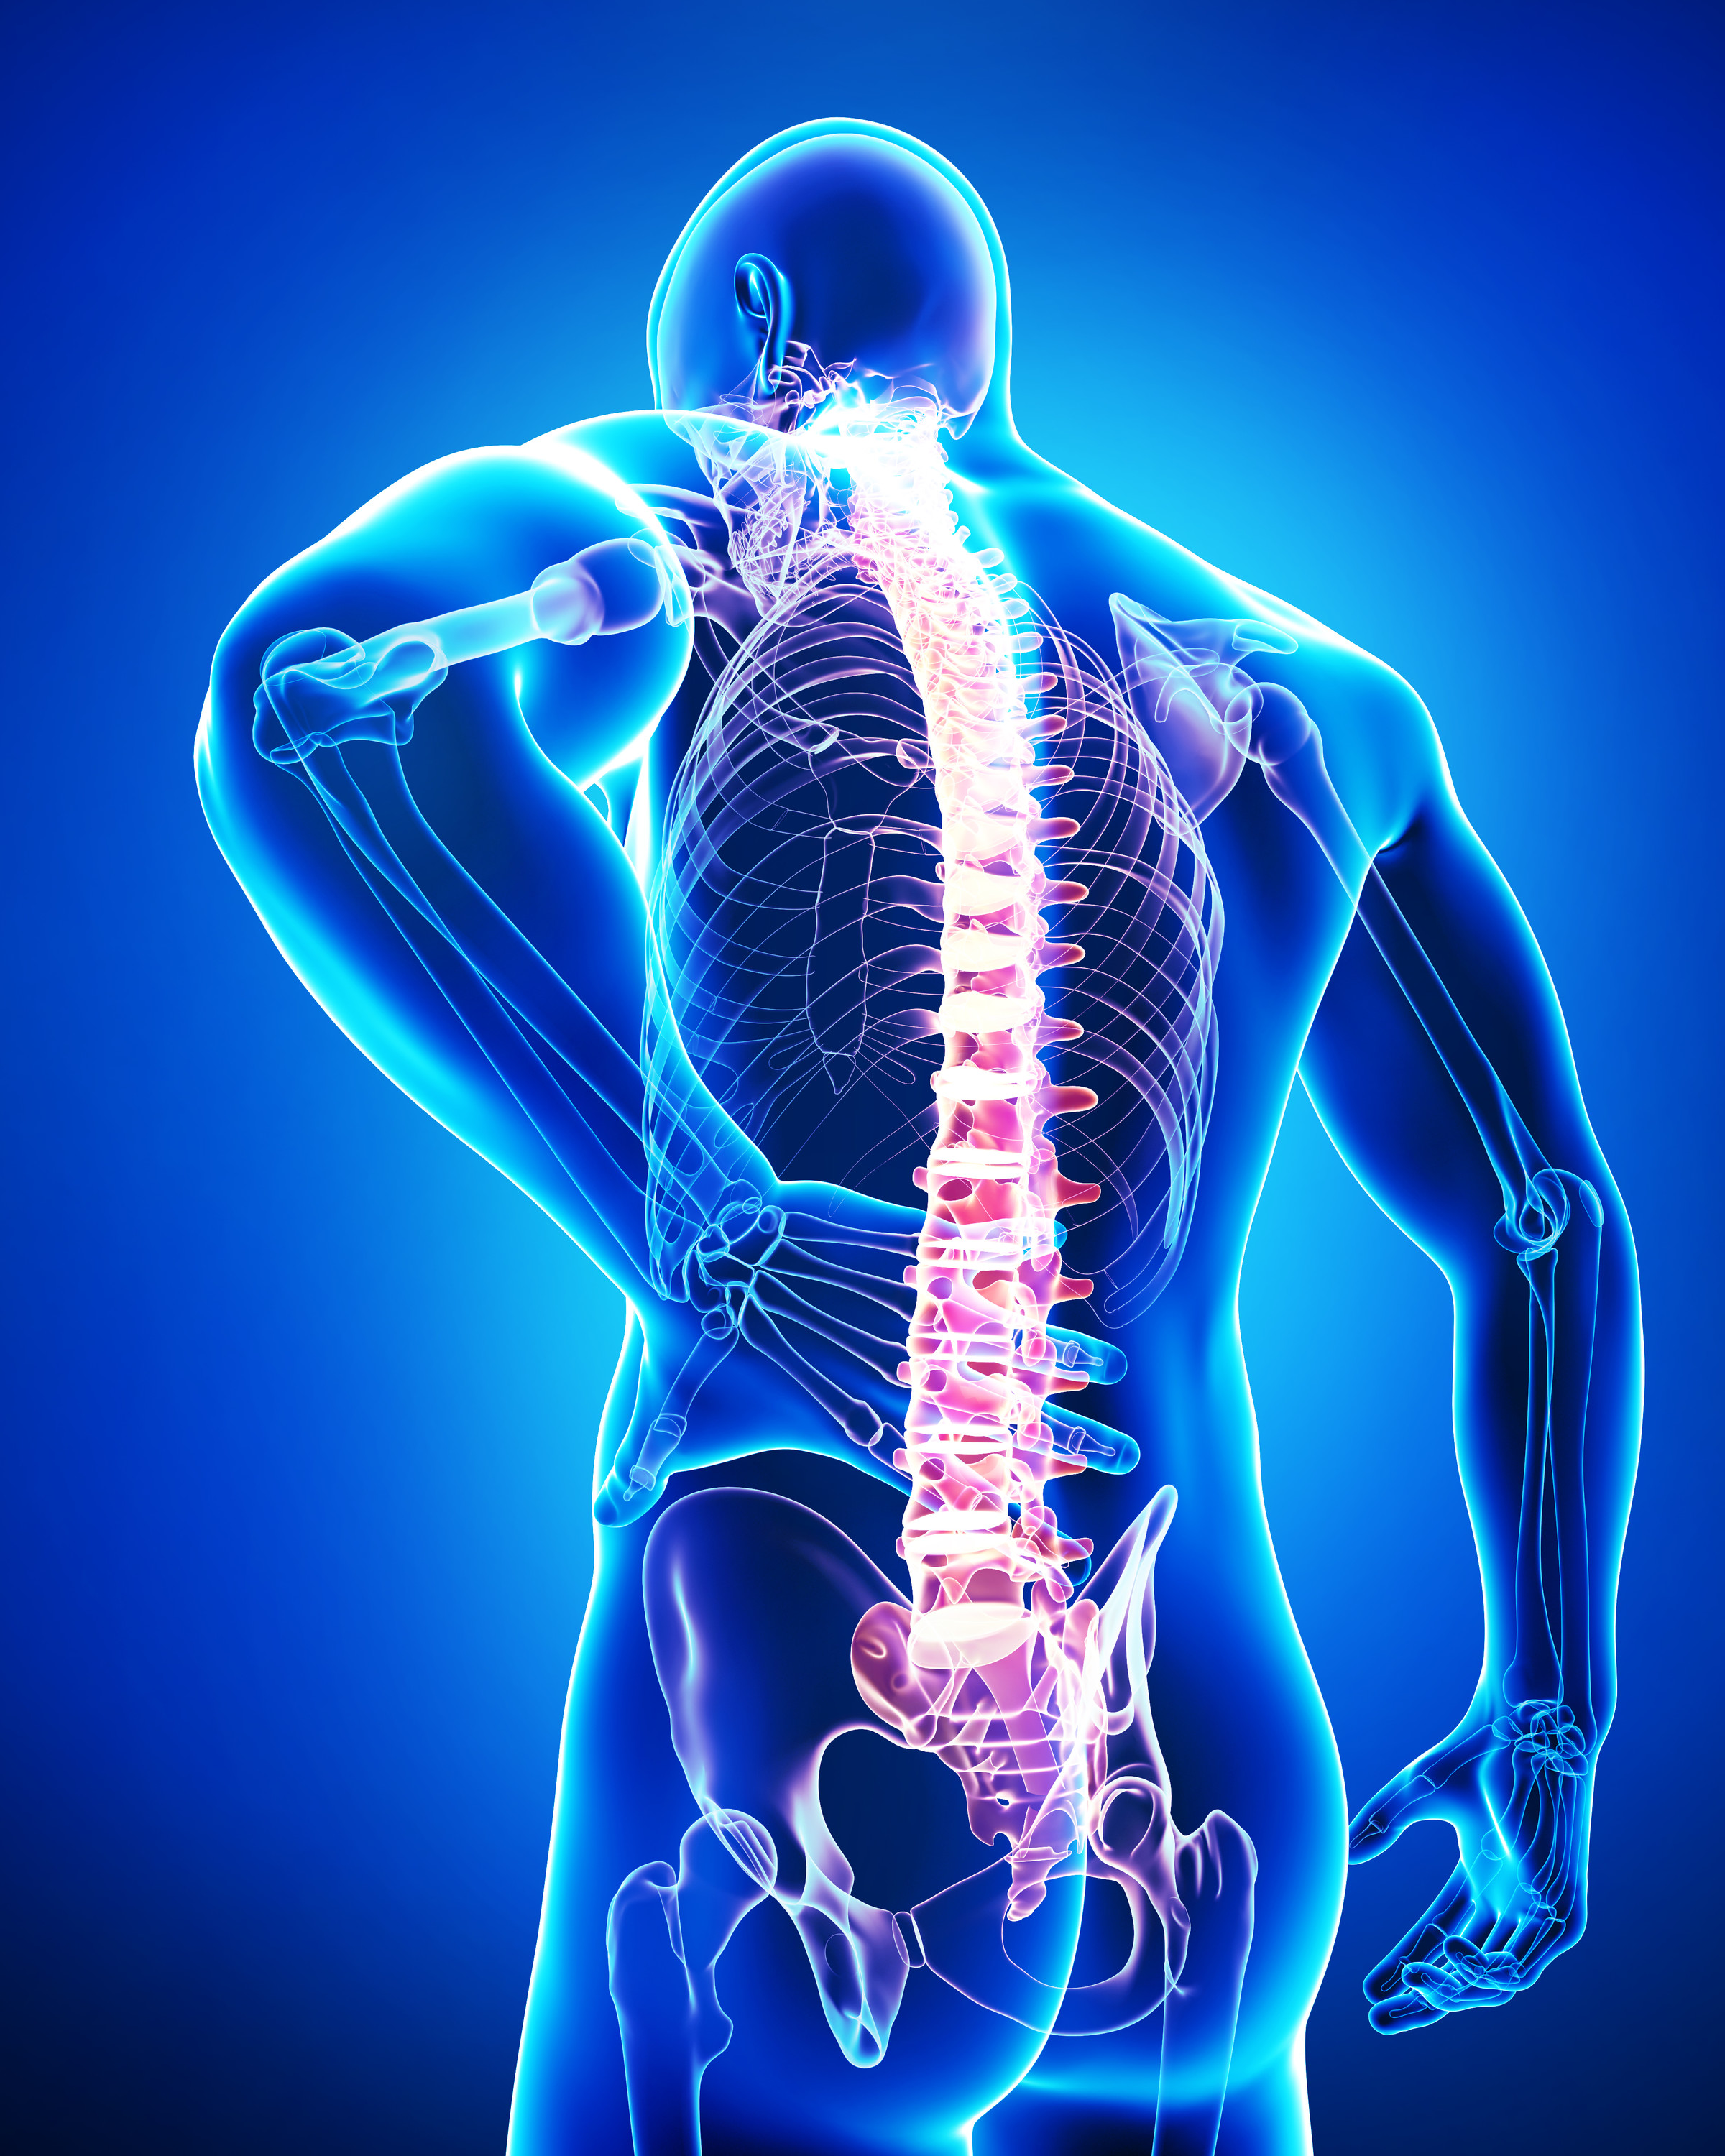 Nerve pain pressure or inflammation, depending upon its source, can cause sharp neck and back pain.